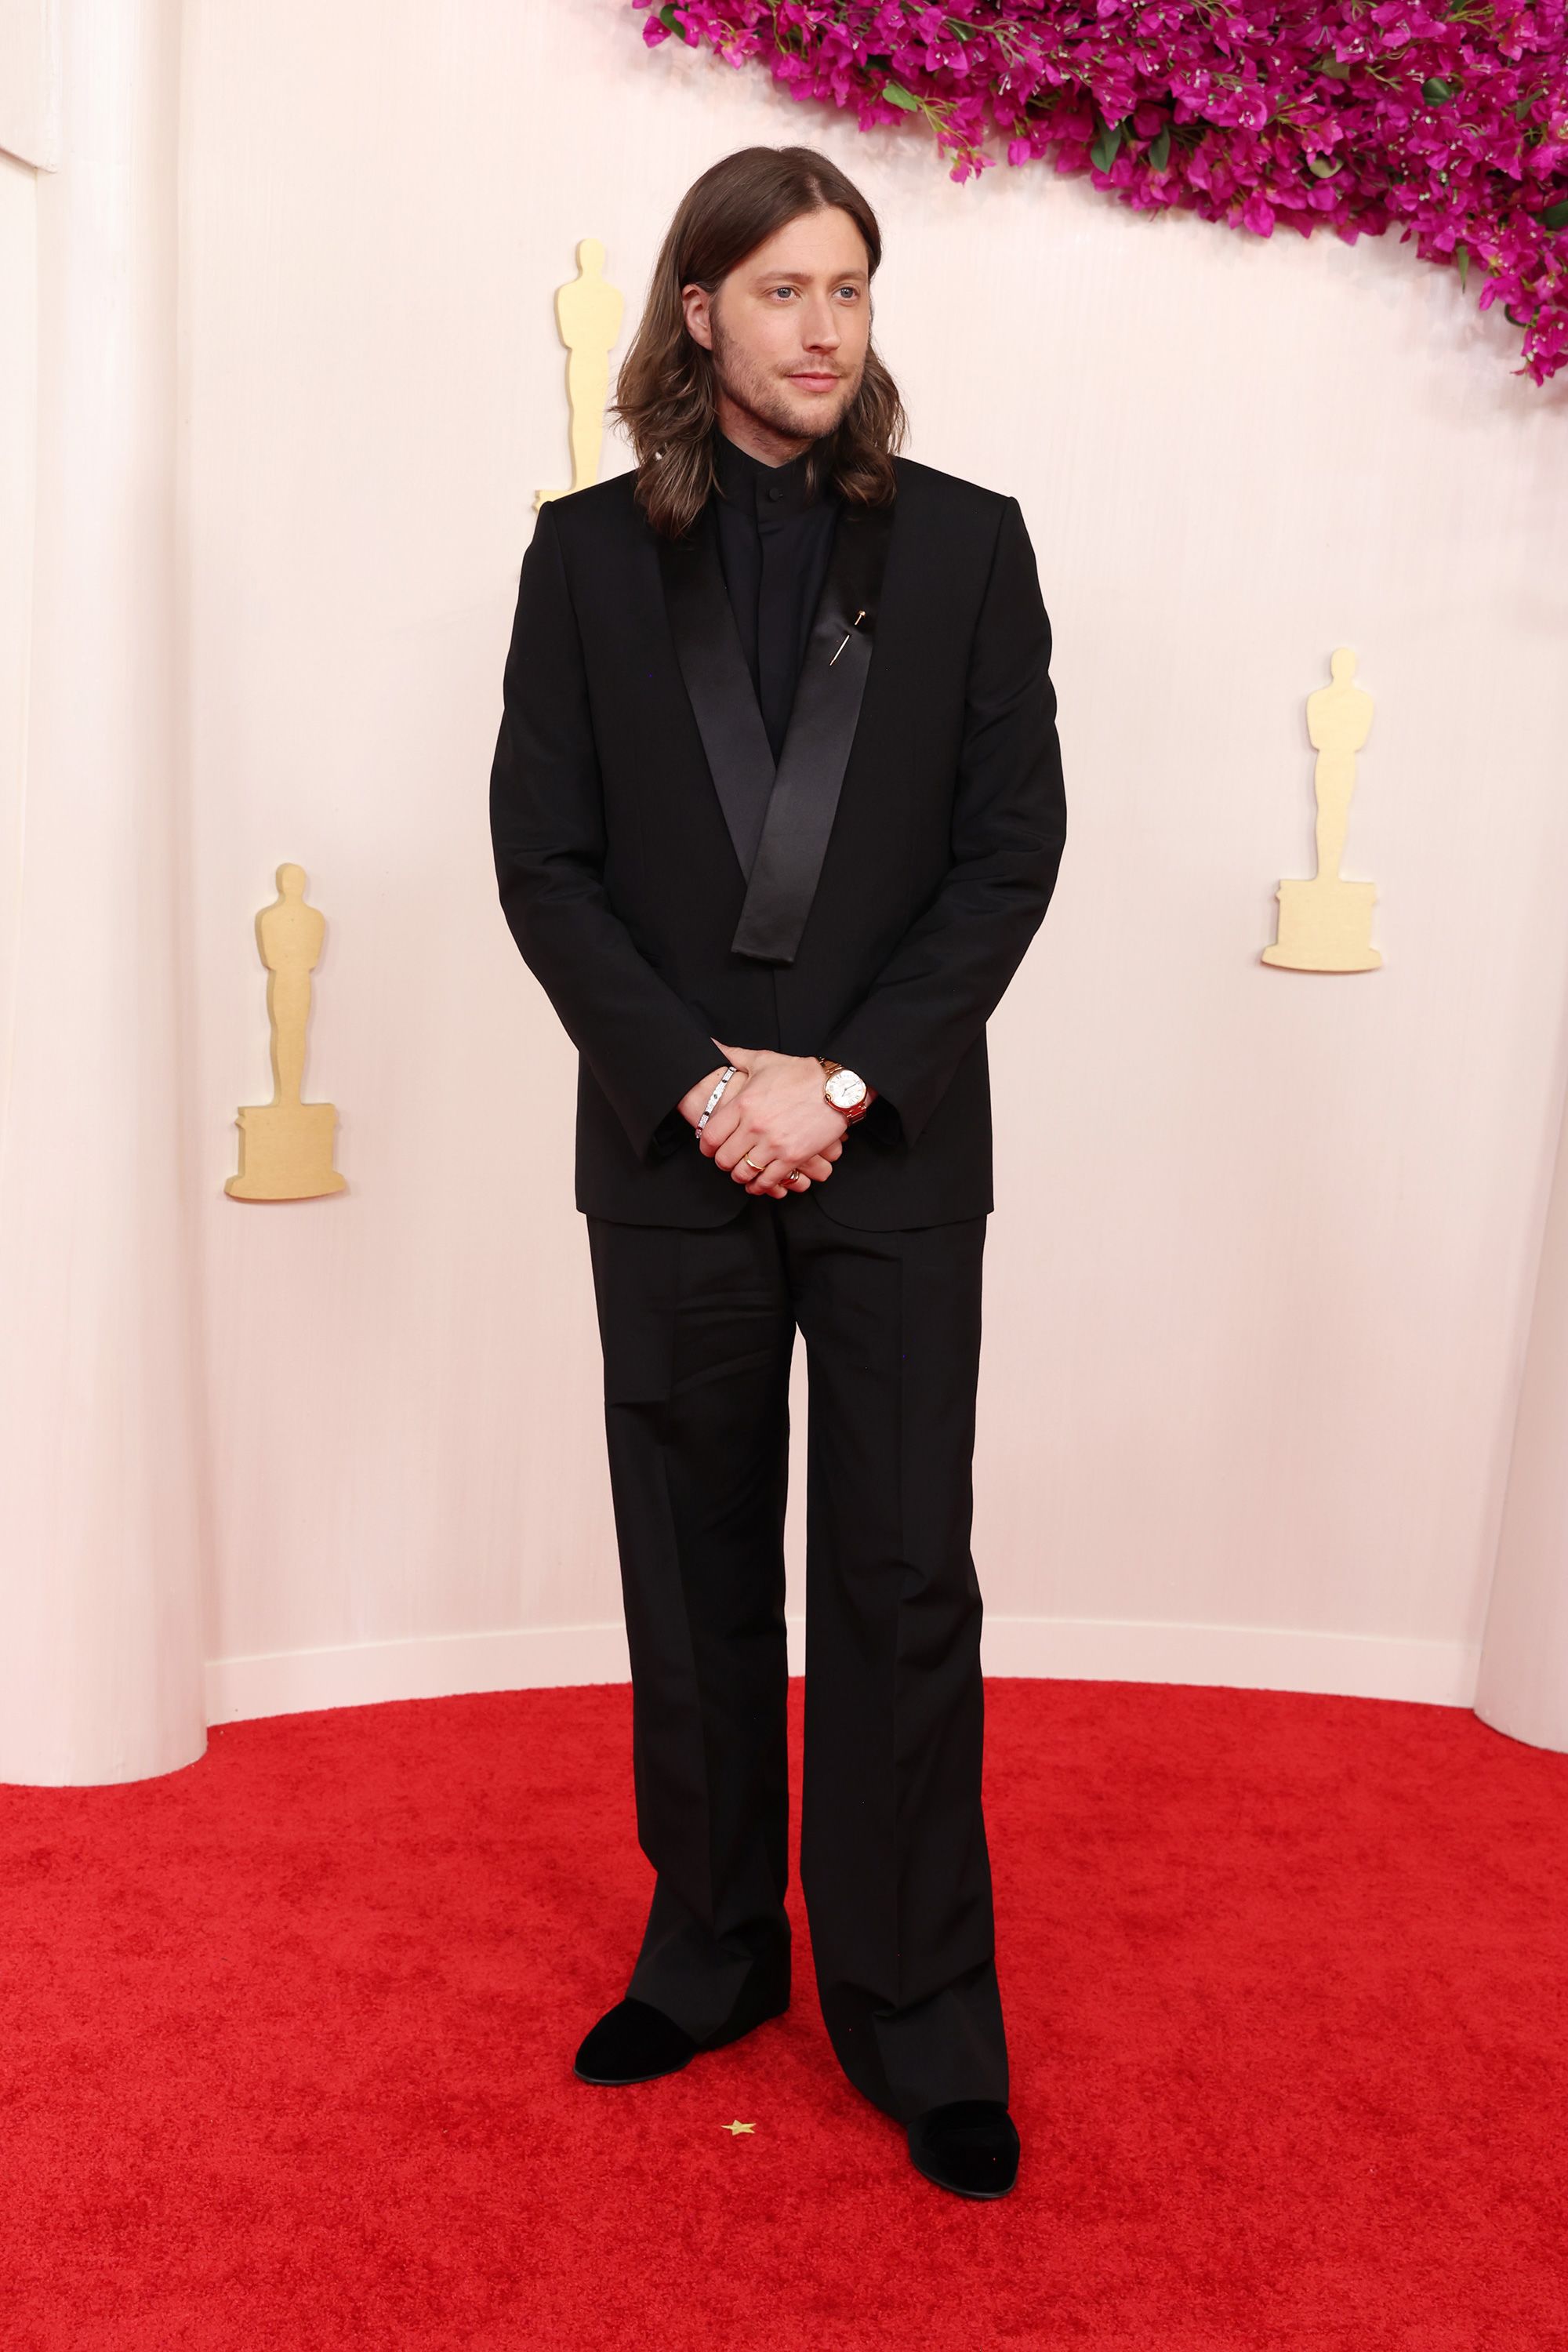 Composer Ludwig Göransson, nominated for Best Original Score for “Oppenheimer,” wore an all-black suit with an eloquent silver brooch pinned to the lapel.